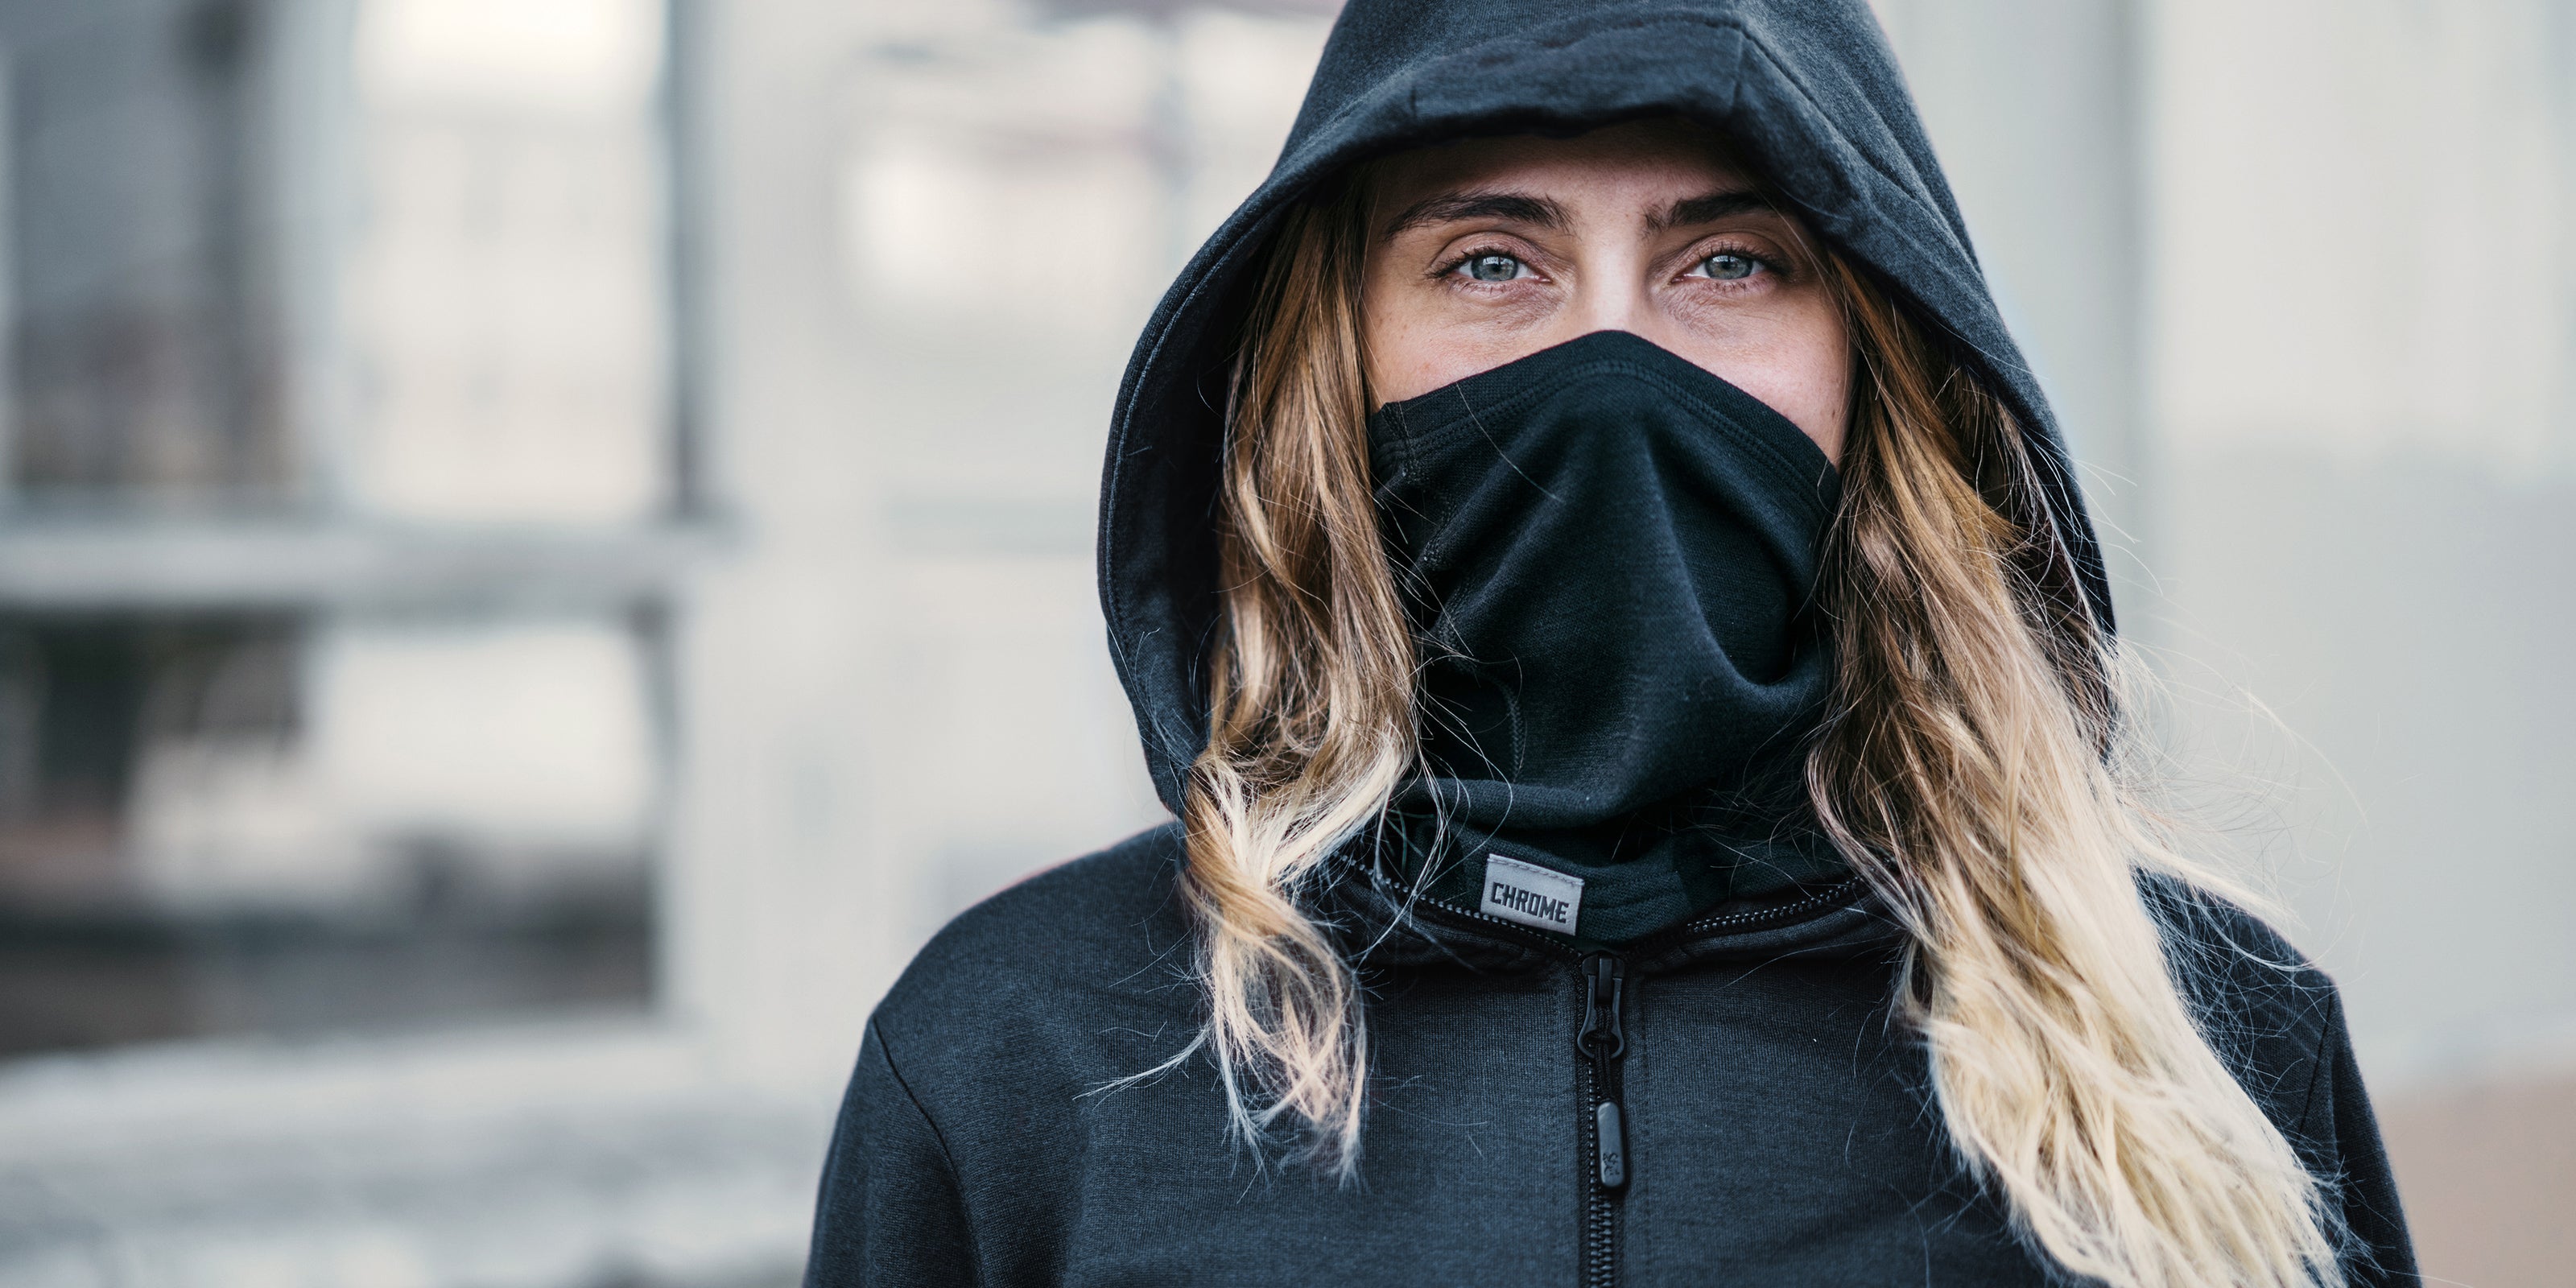 Merino Gaiter worn by a woman with a hoodie on desktop image size